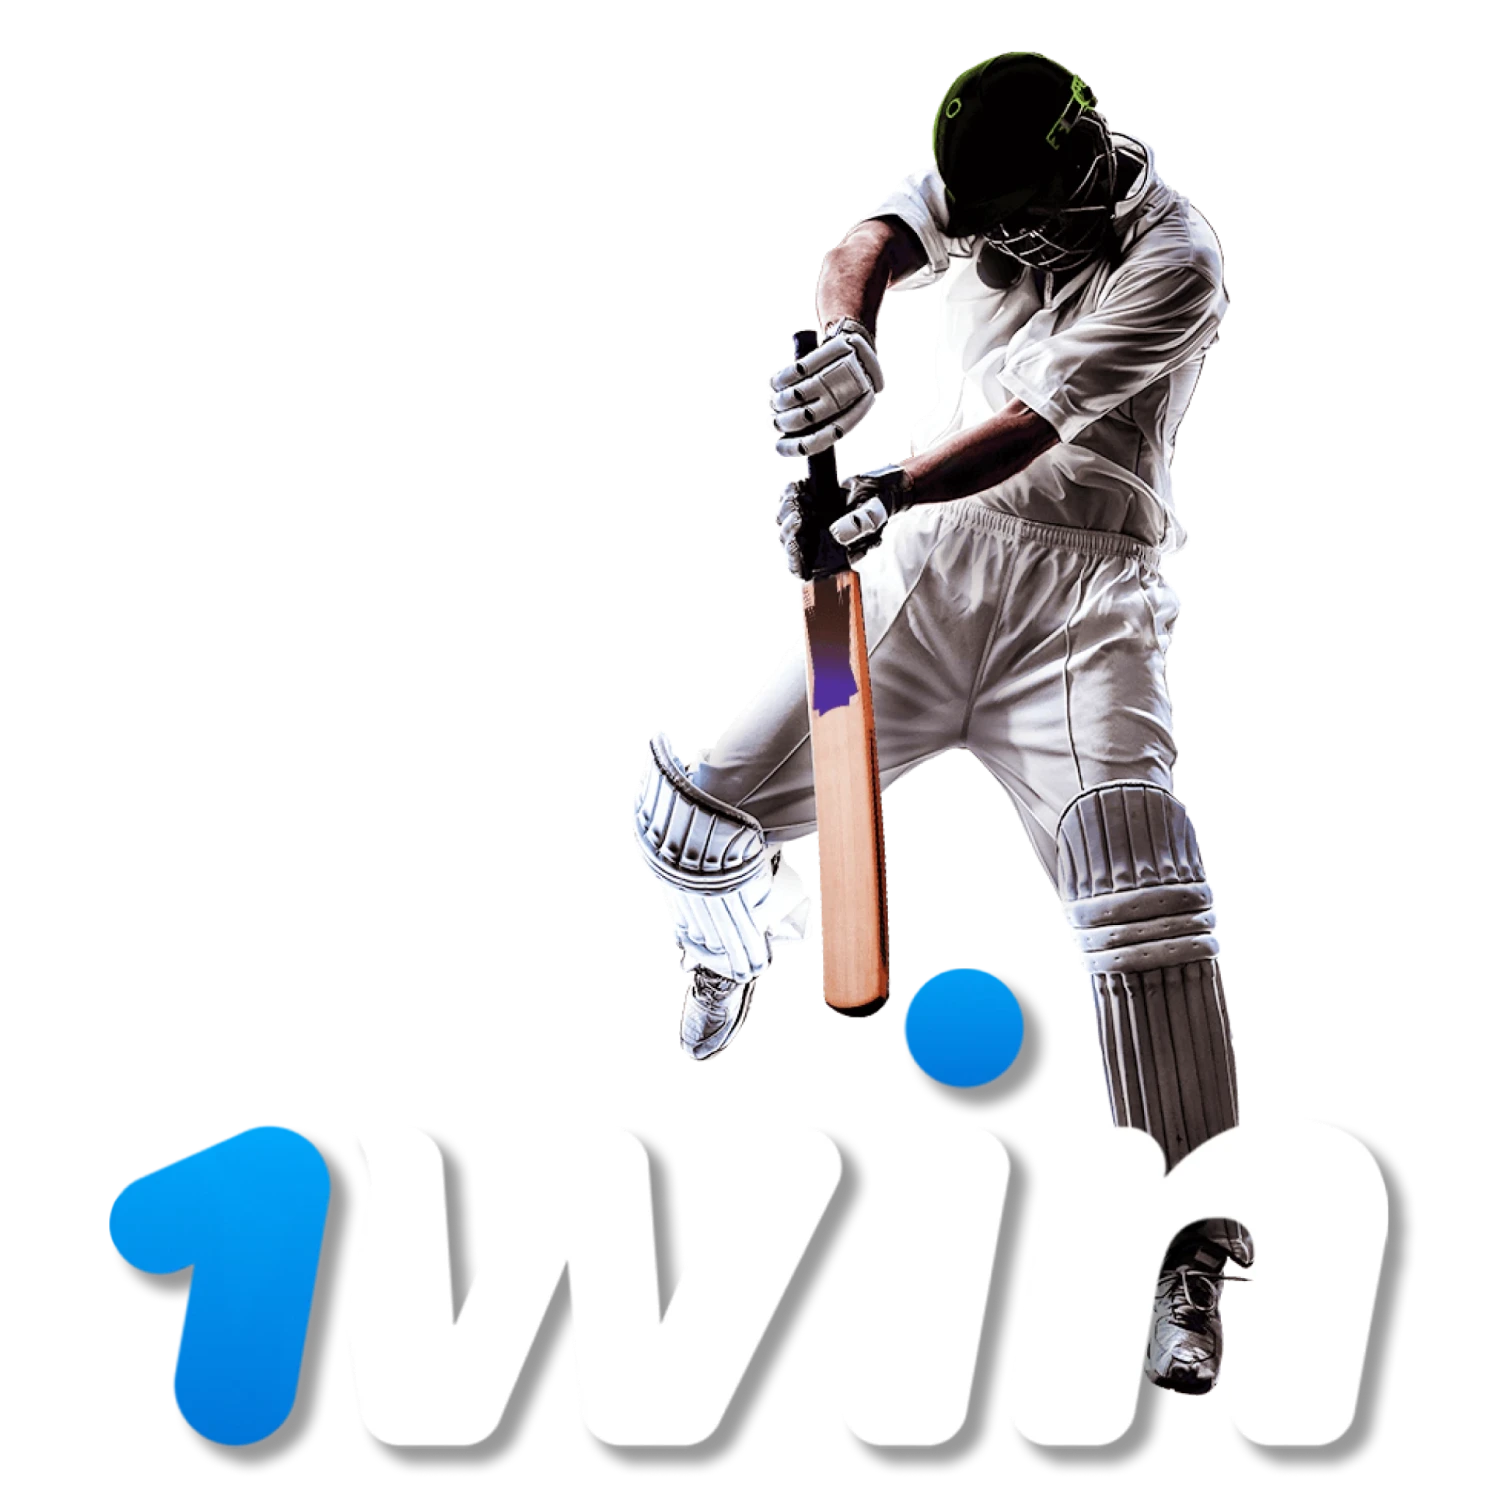 1Win offers sports betting and online casino in India.